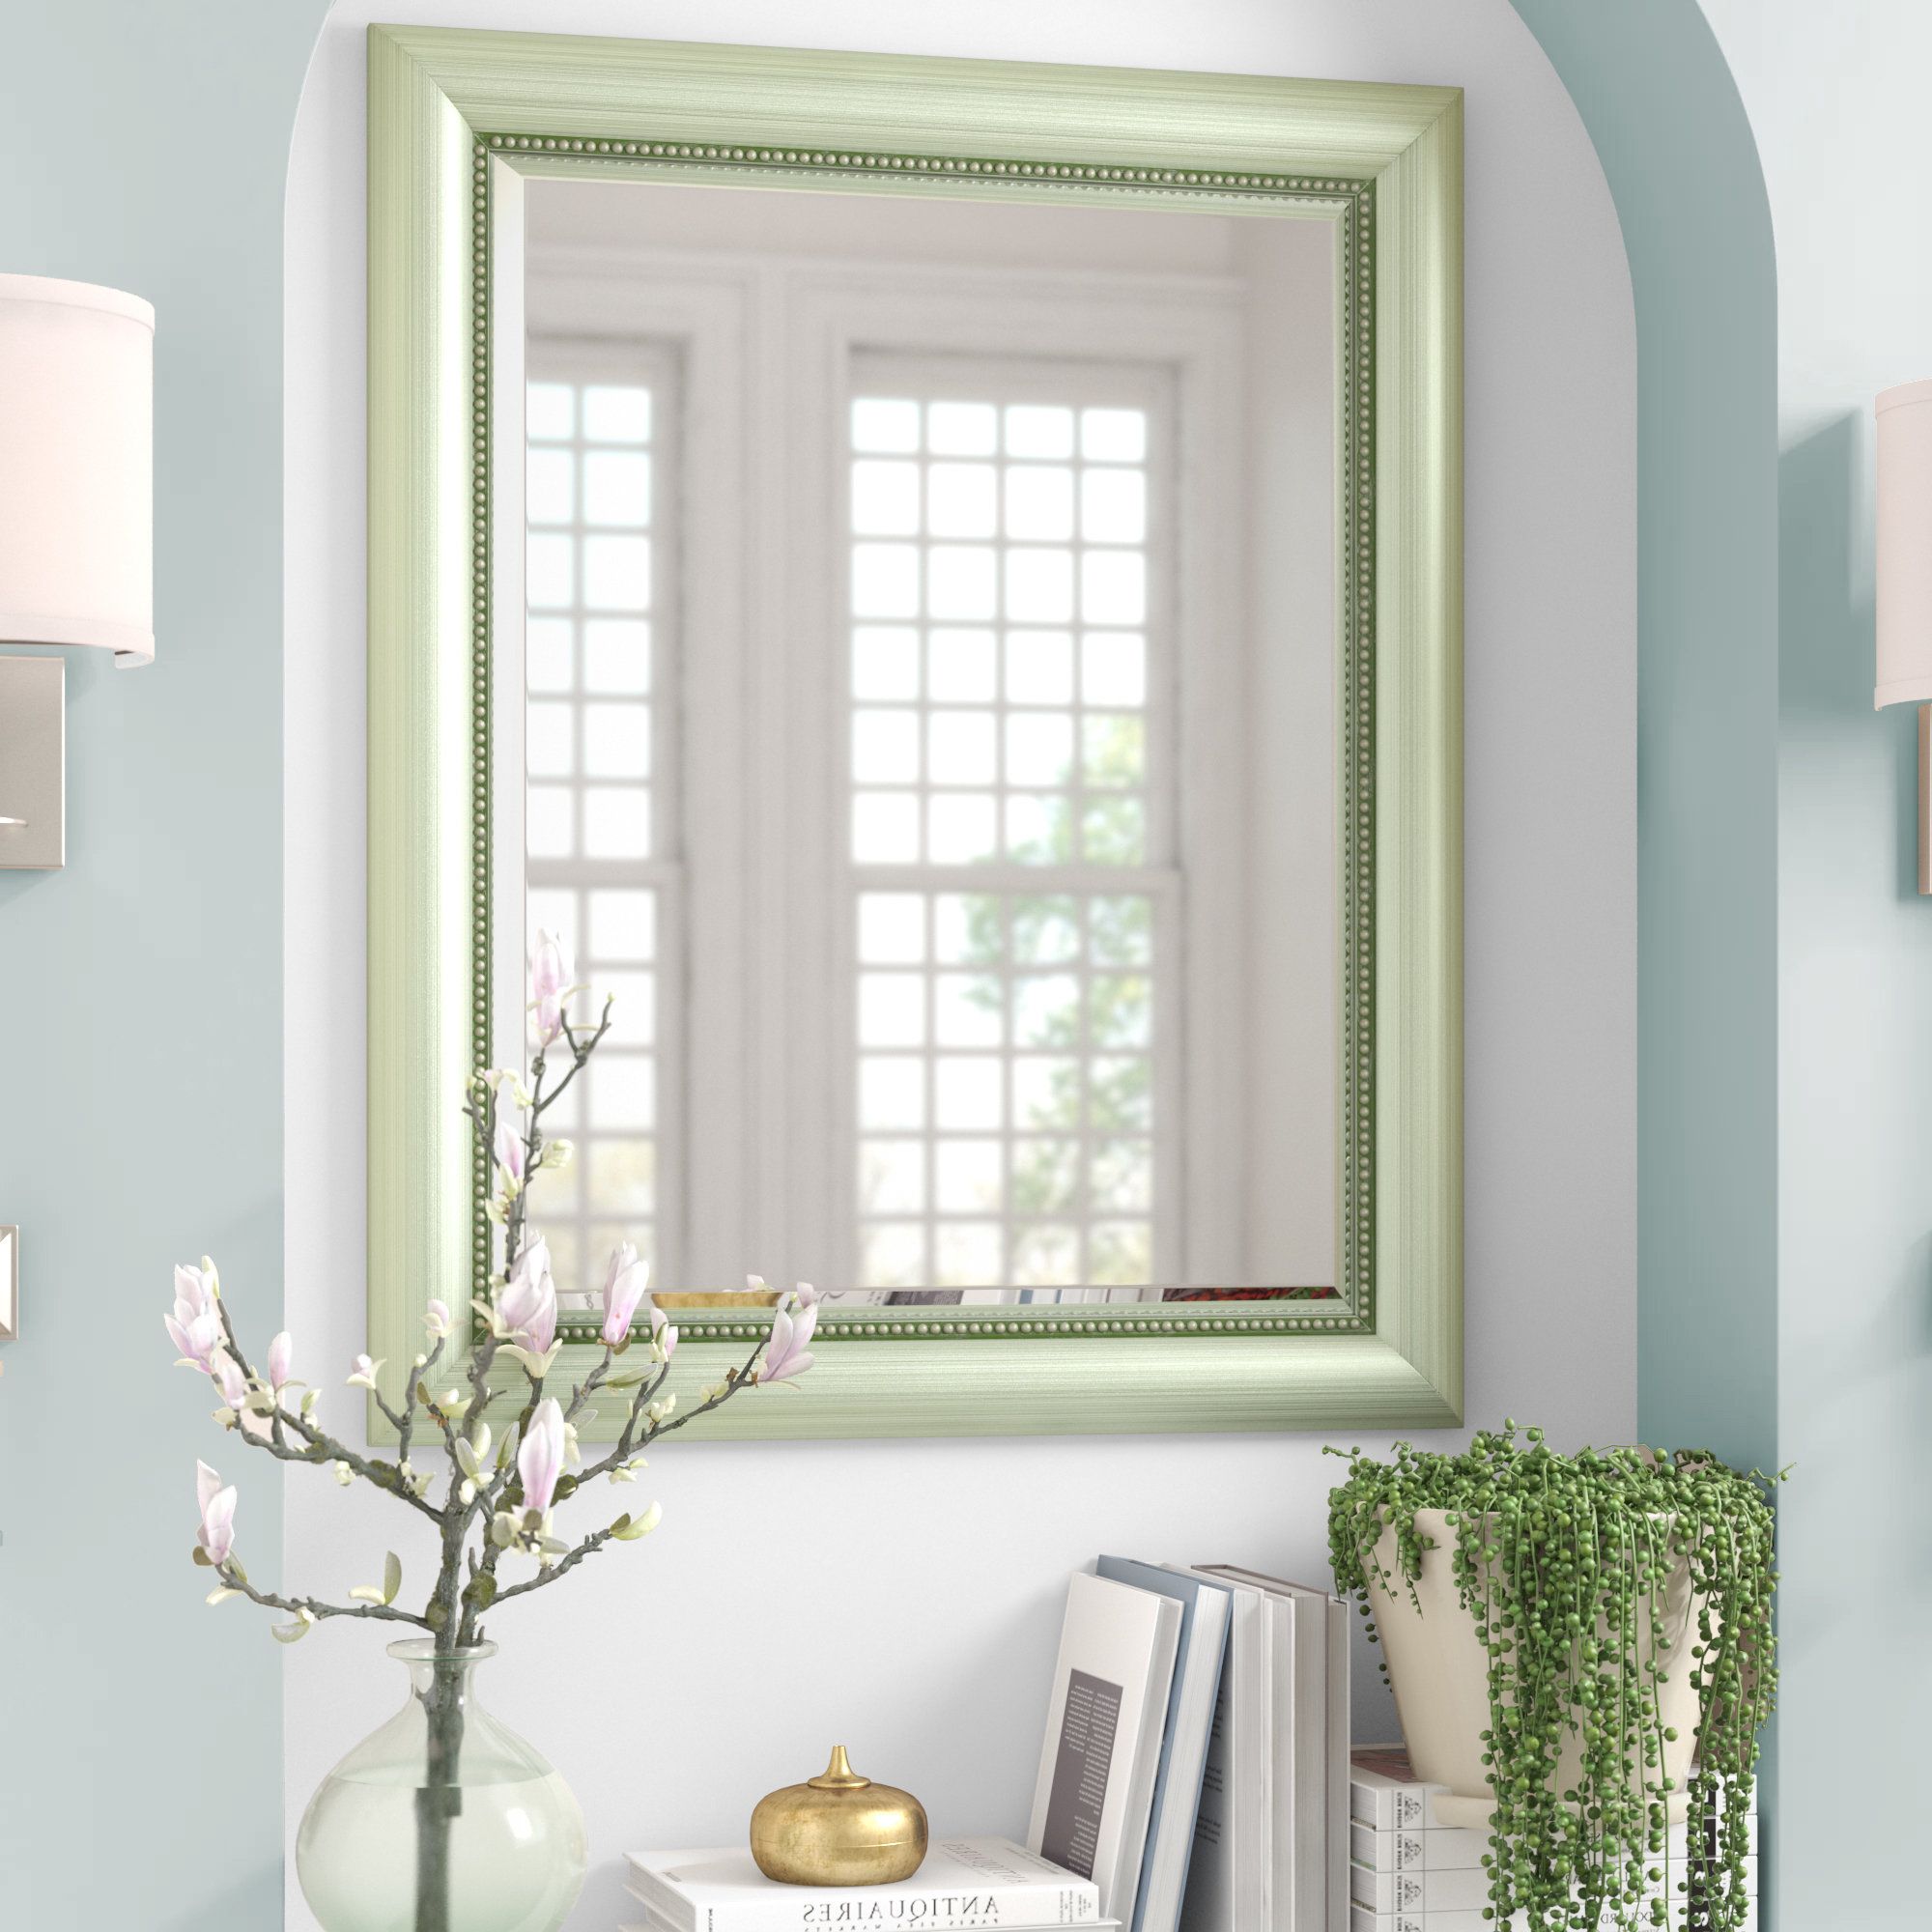 Recent Traditional Beveled Wall Mirror In Traditional Beveled Wall Mirrors (View 12 of 20)